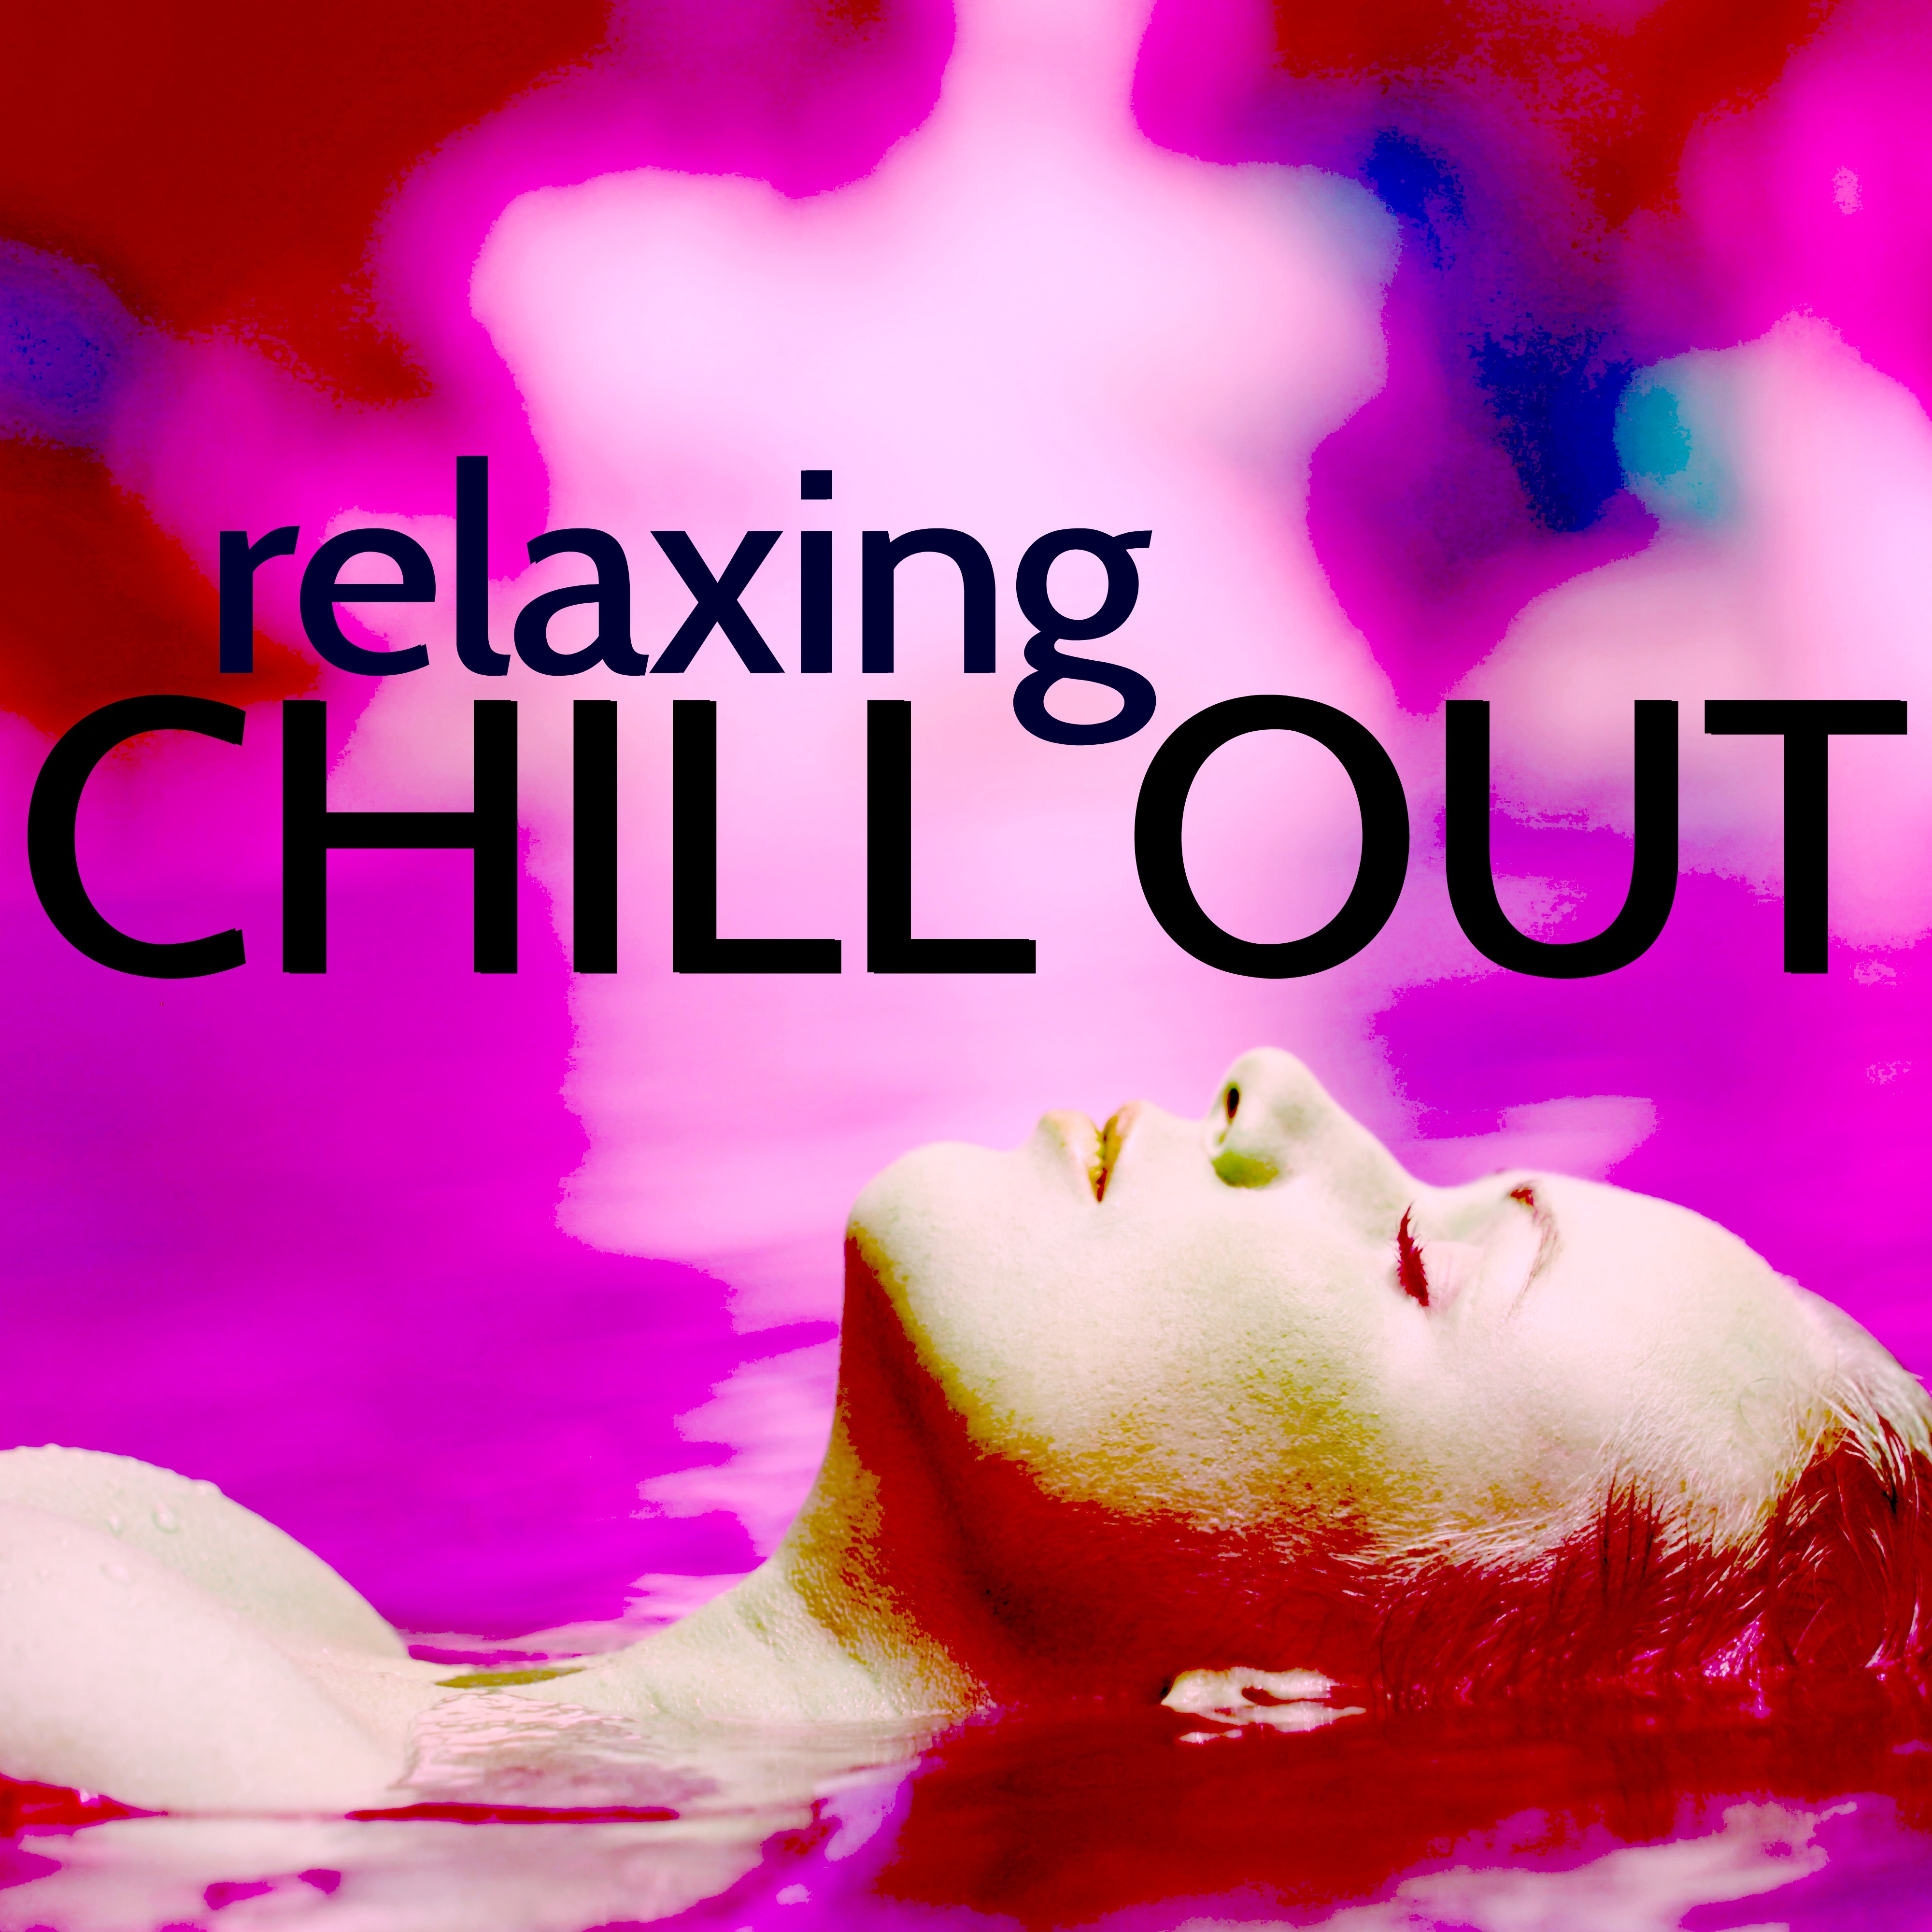 Relaxing Chill Out - Easy Listening Jazz Music & Lounge Relaxing Songs